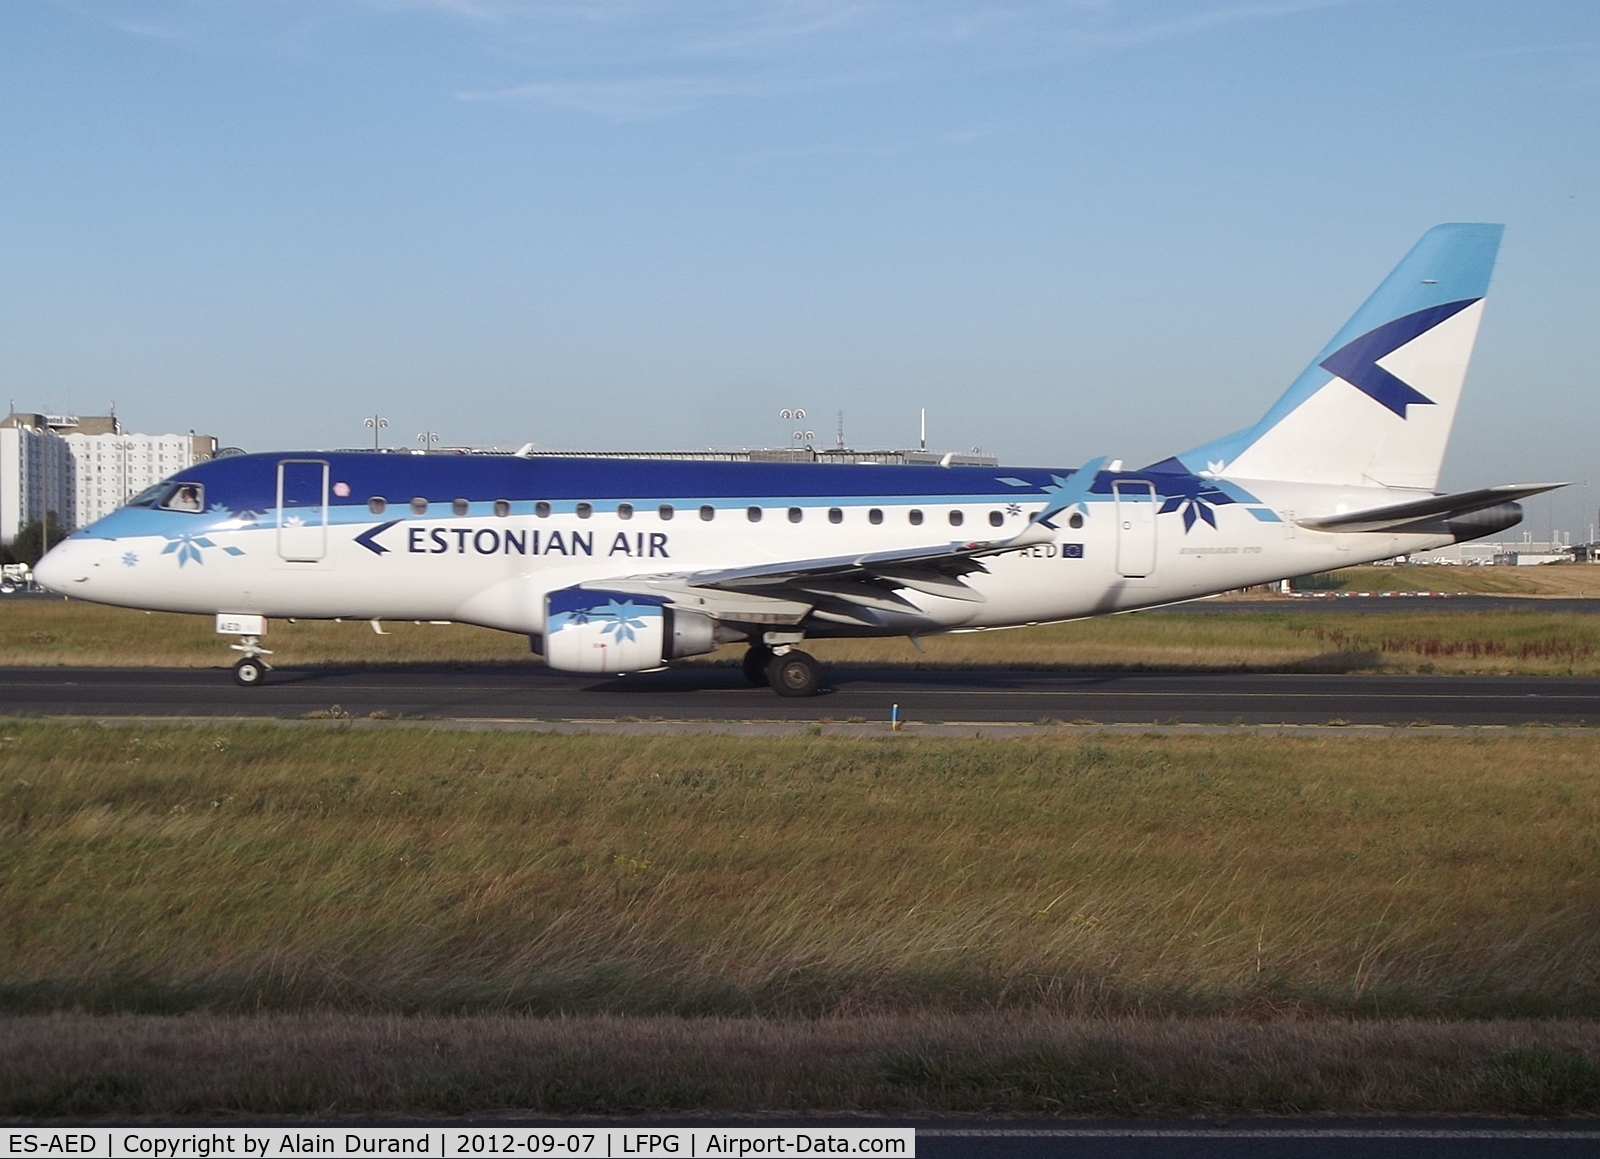 ES-AED, 2005 Embraer 170LR (ERJ-170-100LR) C/N 17000112, The four E170s are leased as stop gaps pending the deliveries of 4 E175s ordered new to Embraer.